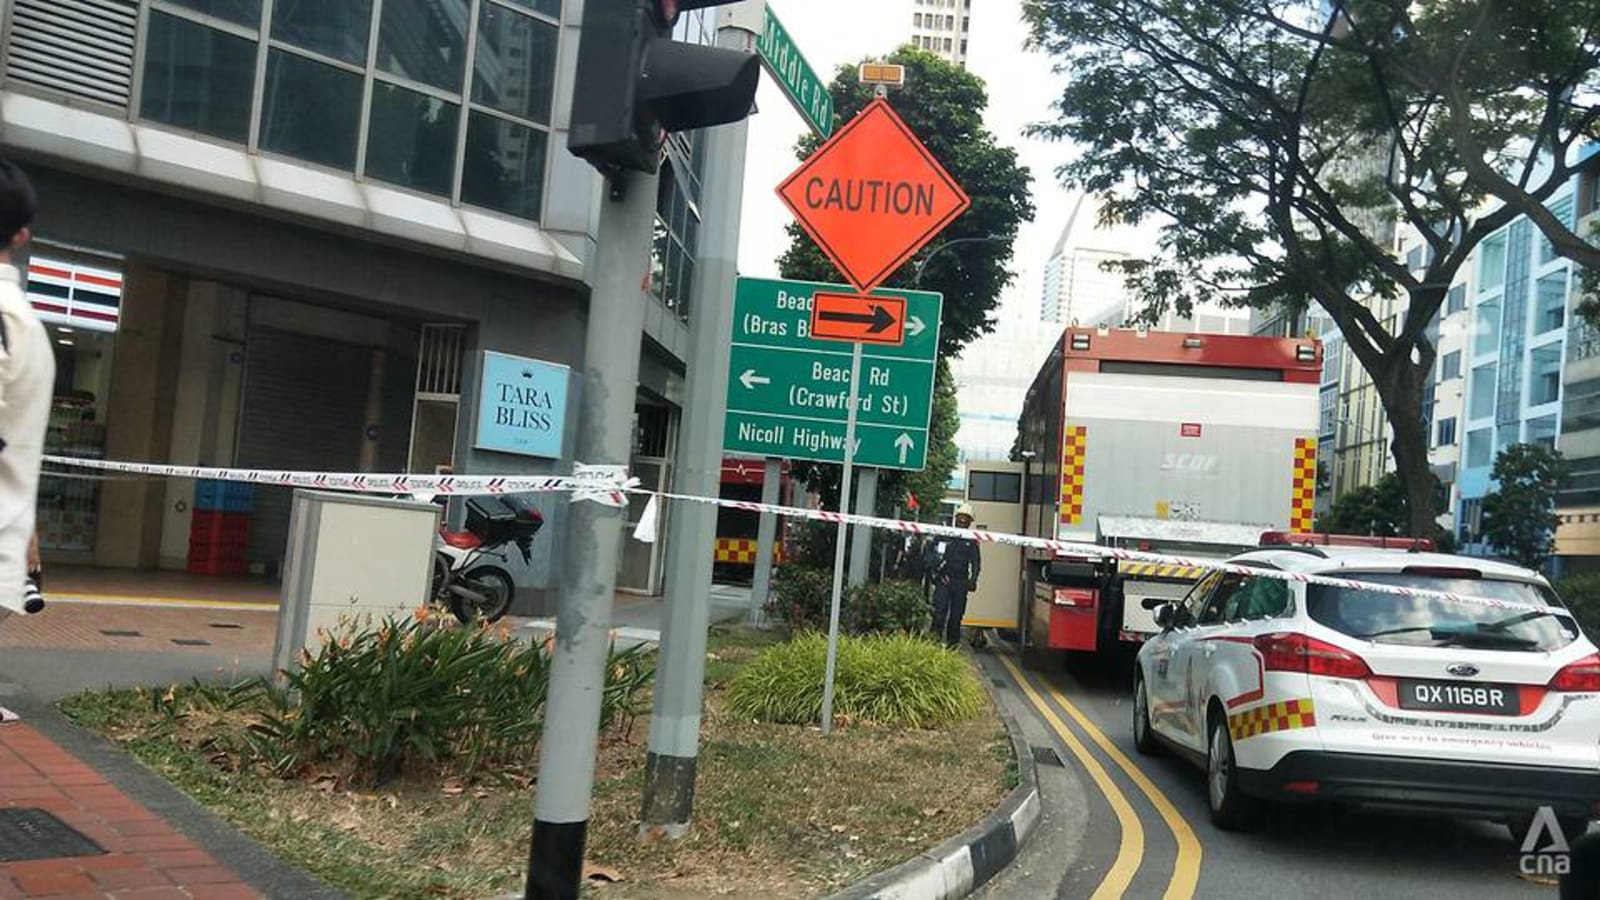 technician-who-died-triggered-automated-movement-before-lift-was-put-in-safety-mode:-coroner